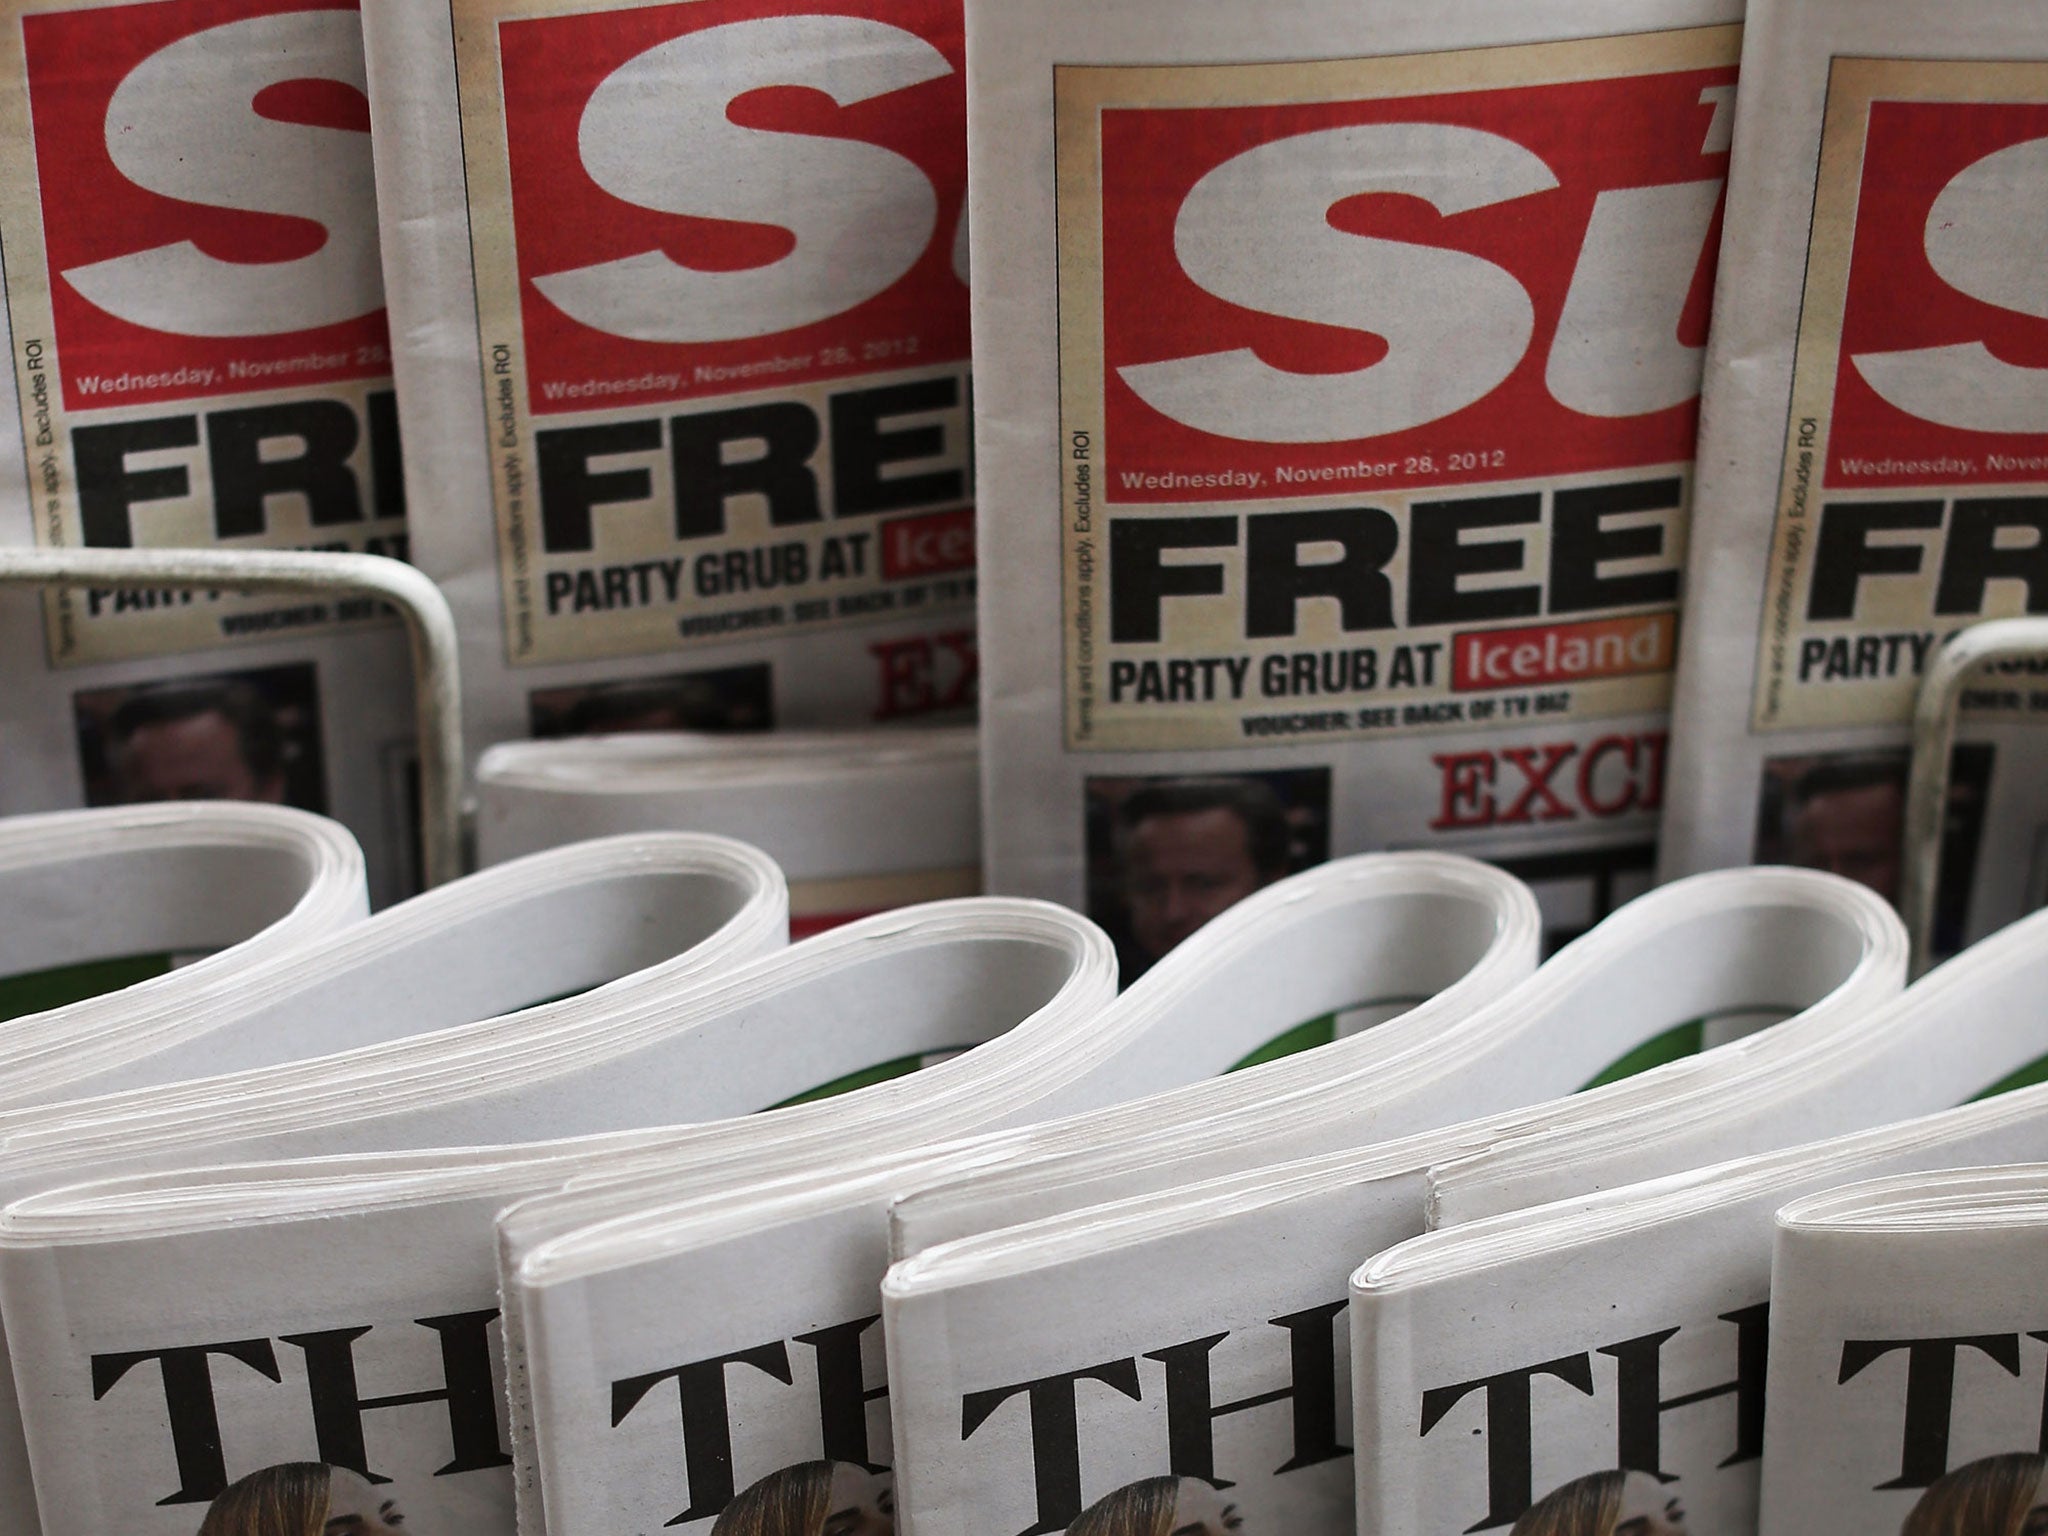 News UK is the publisher of The Sun and The Times, among other titles